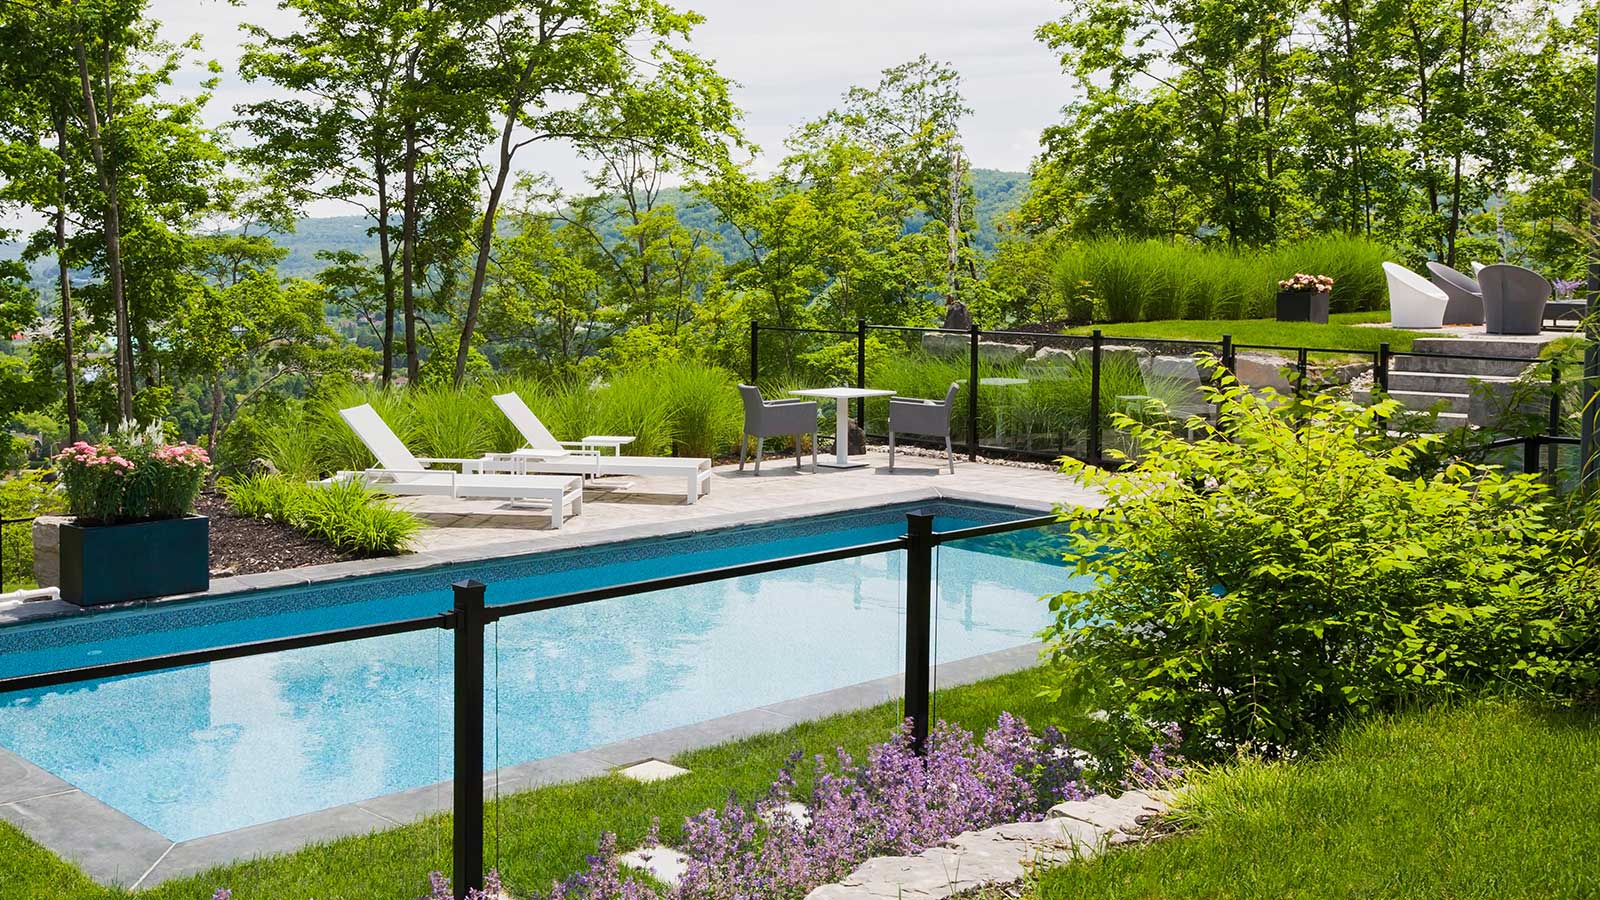 Will a backyard pool add value to your home? The experts weigh in